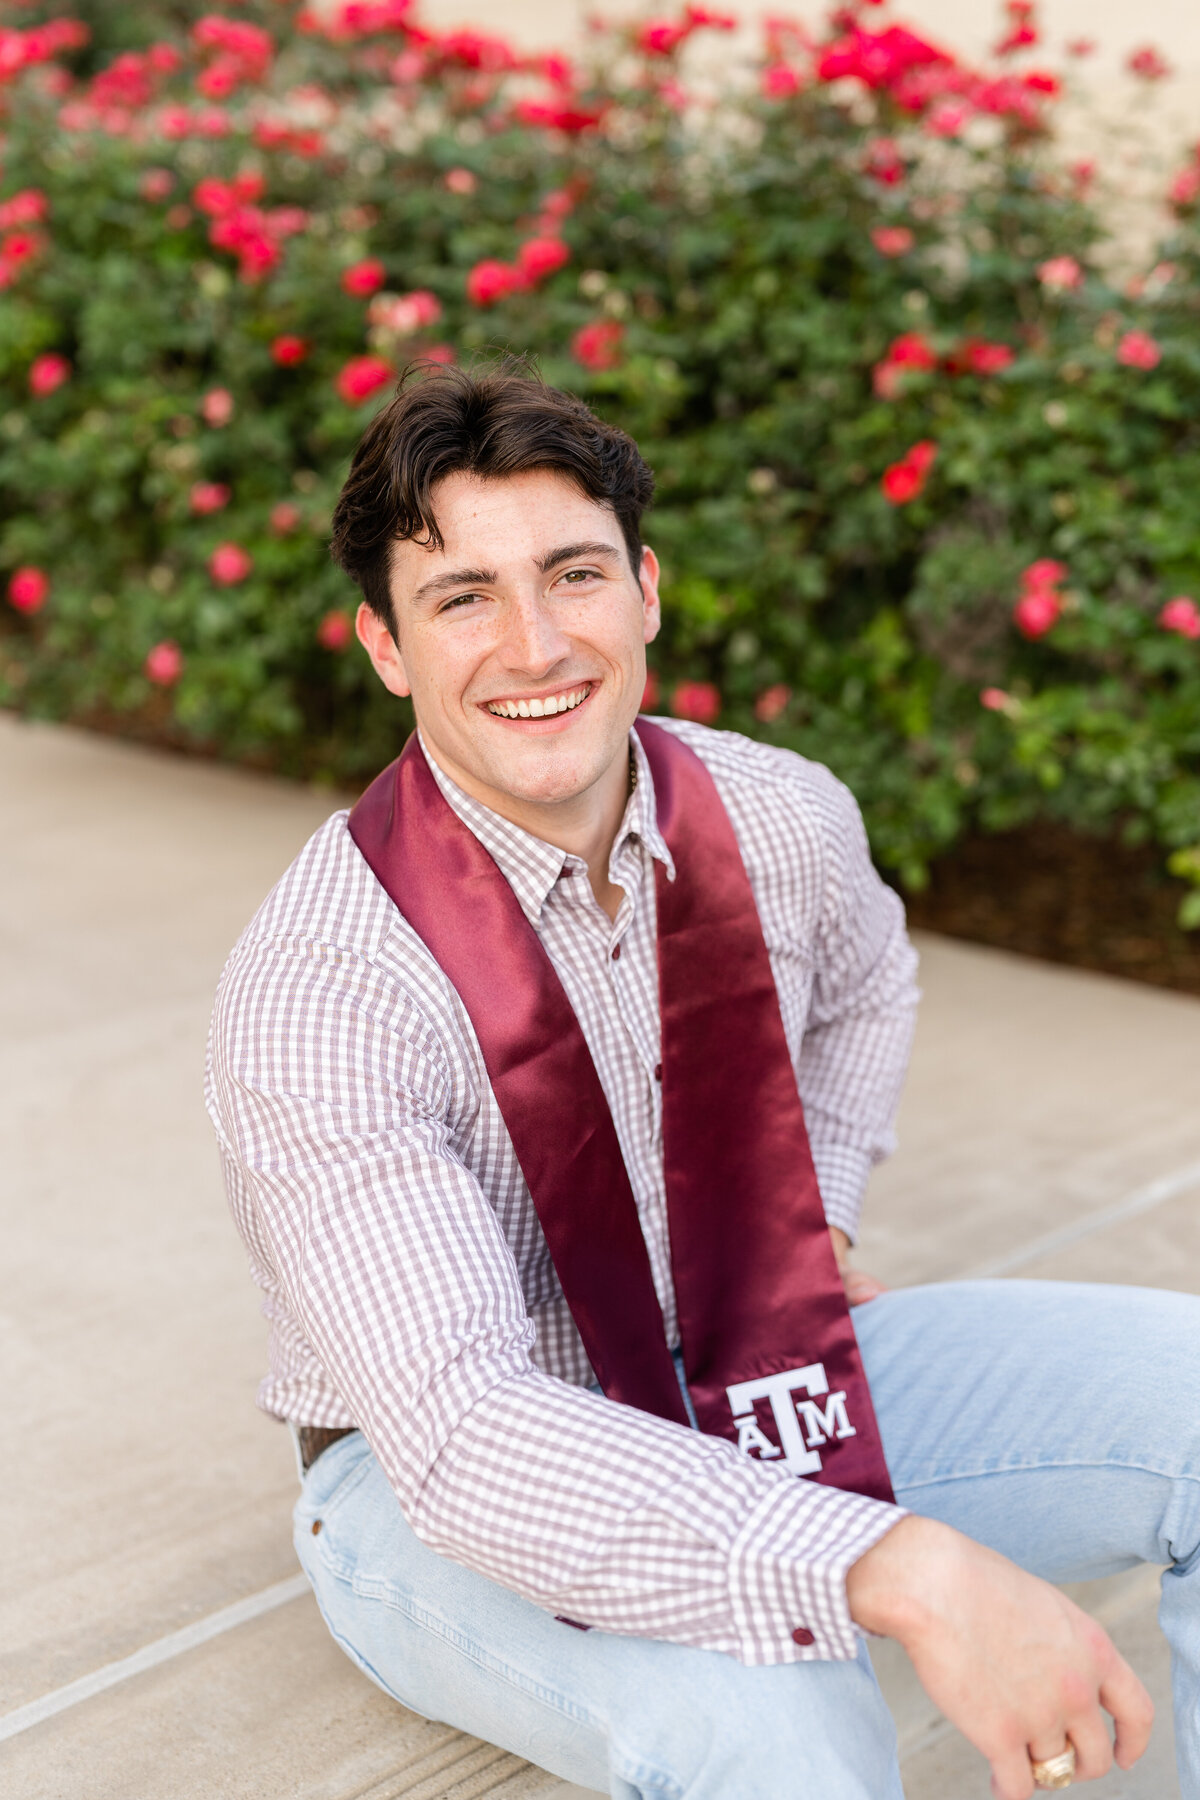 Texas A&M senior guy sitting on stairs and laughing with hand on leg and leaning while wearing maroon stole